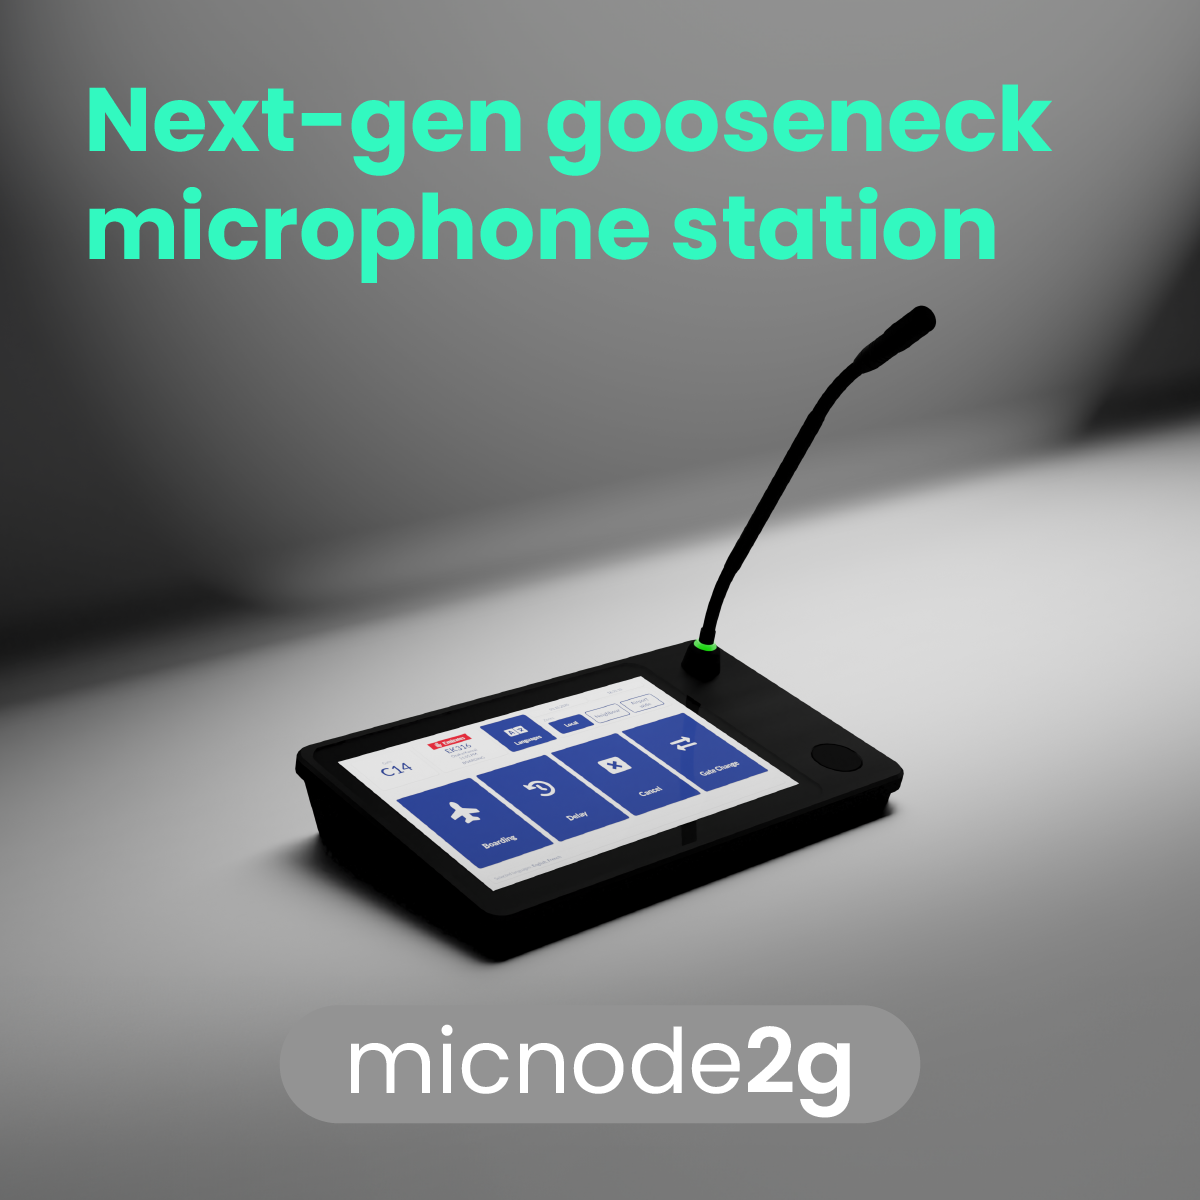  The micnode2g microphone station with a gooseneck microphone is presented as a next-generation microphone station. 